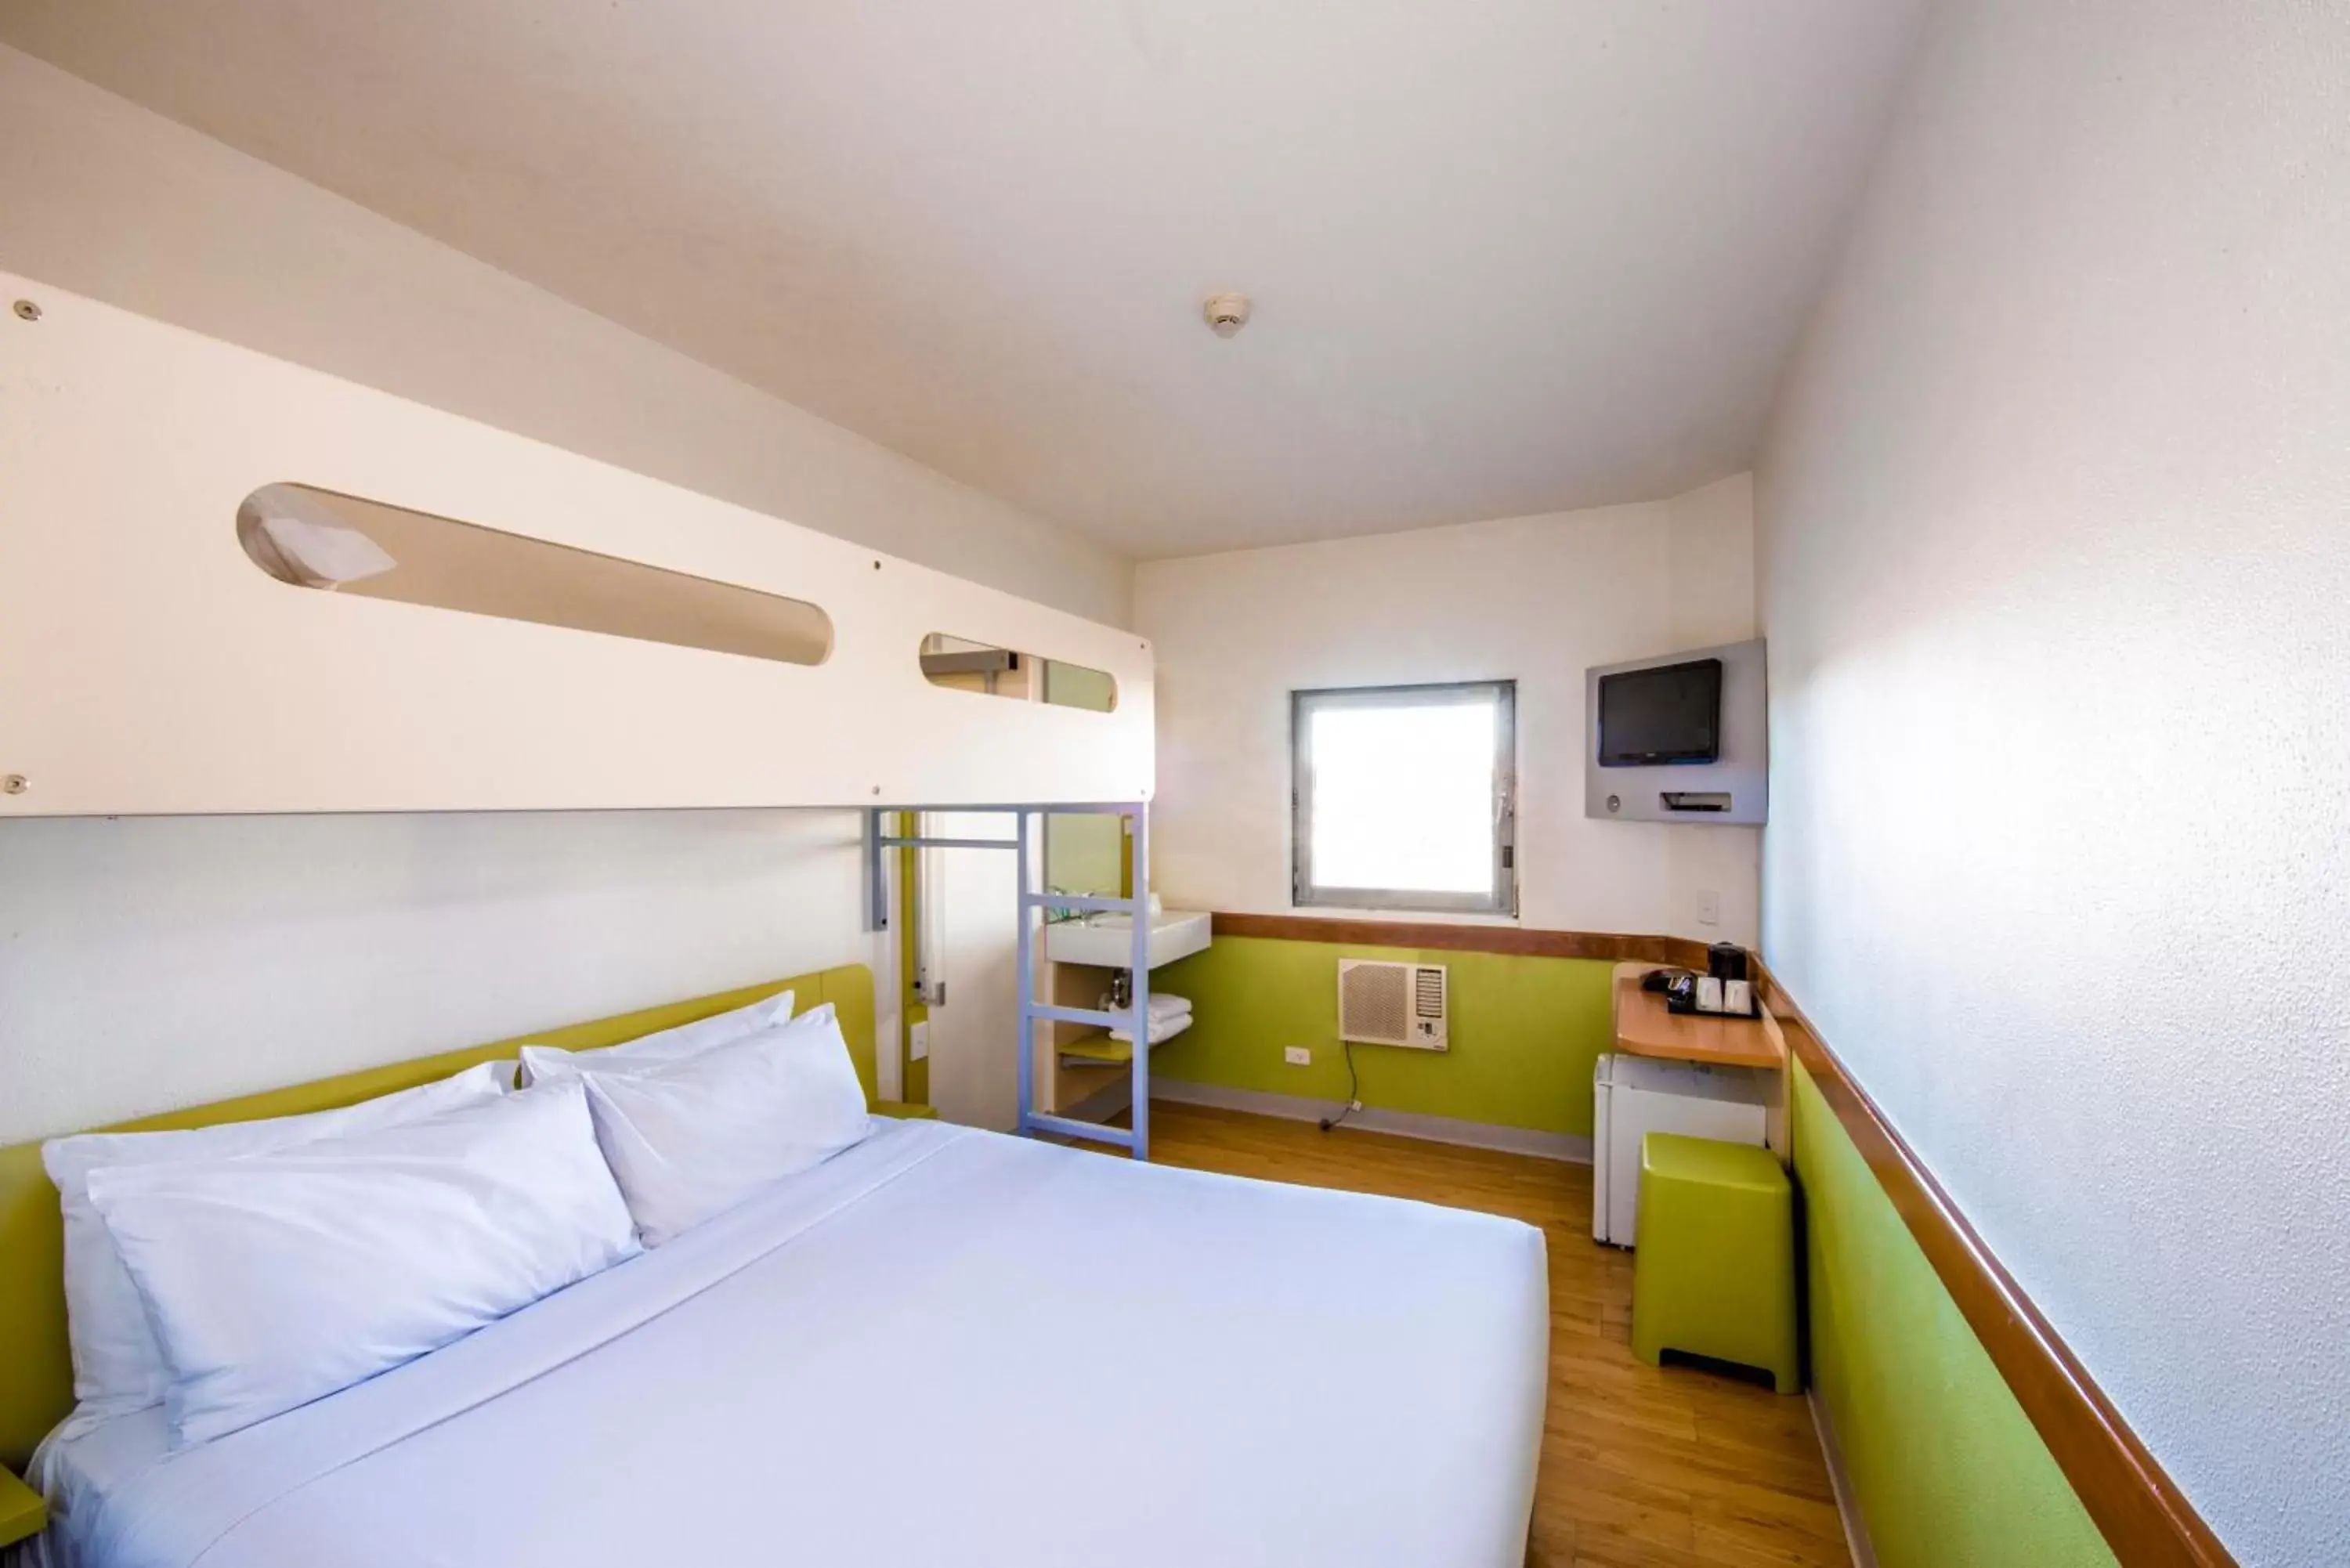 Day, Bunk Bed in ibis Budget - Campbelltown